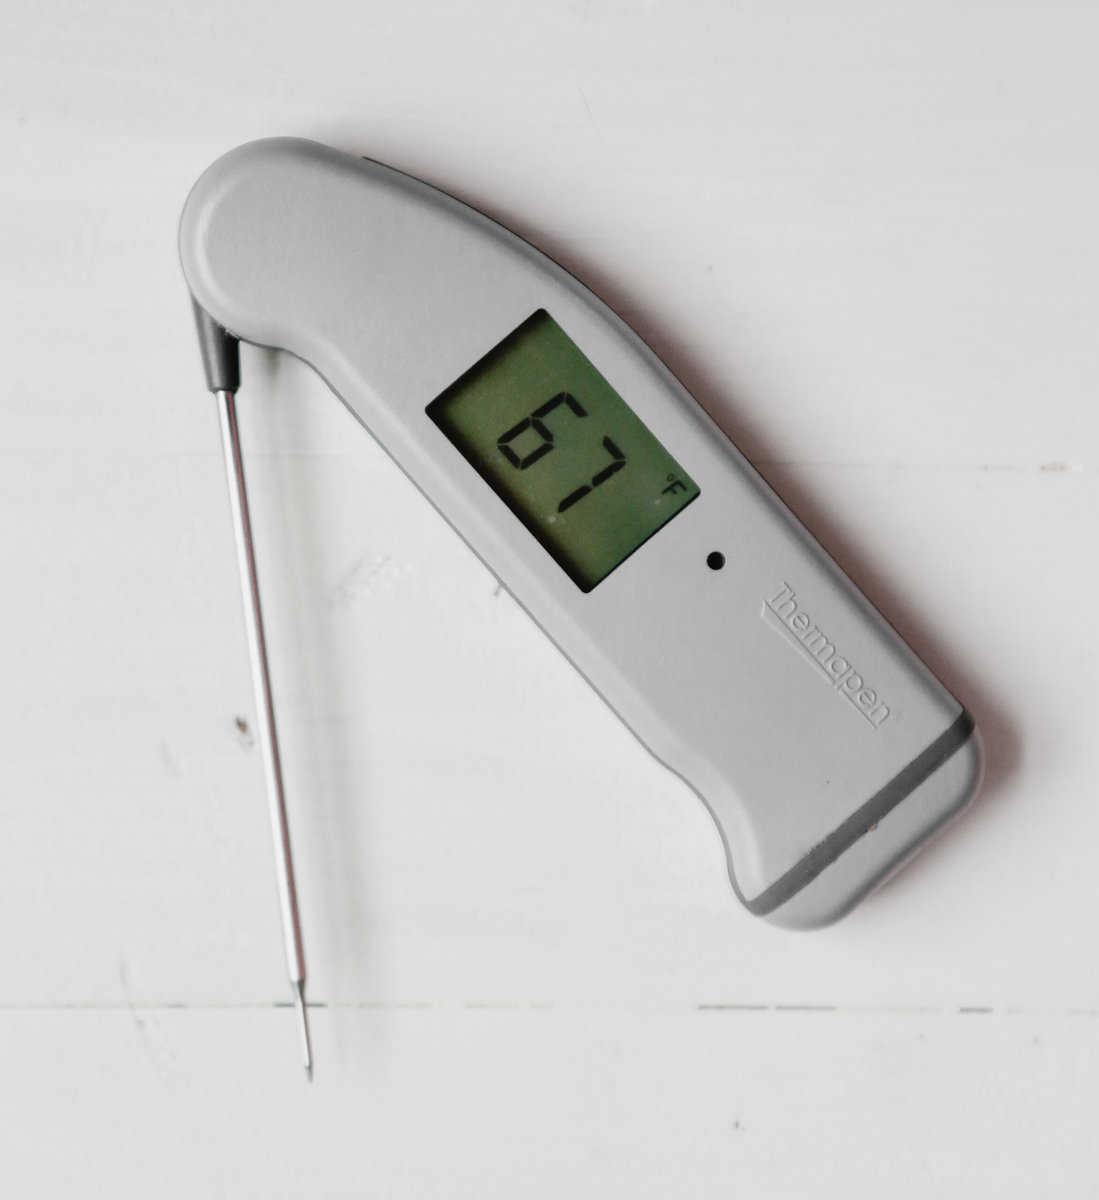 Photograph of a Thermapen from ThermoWorks